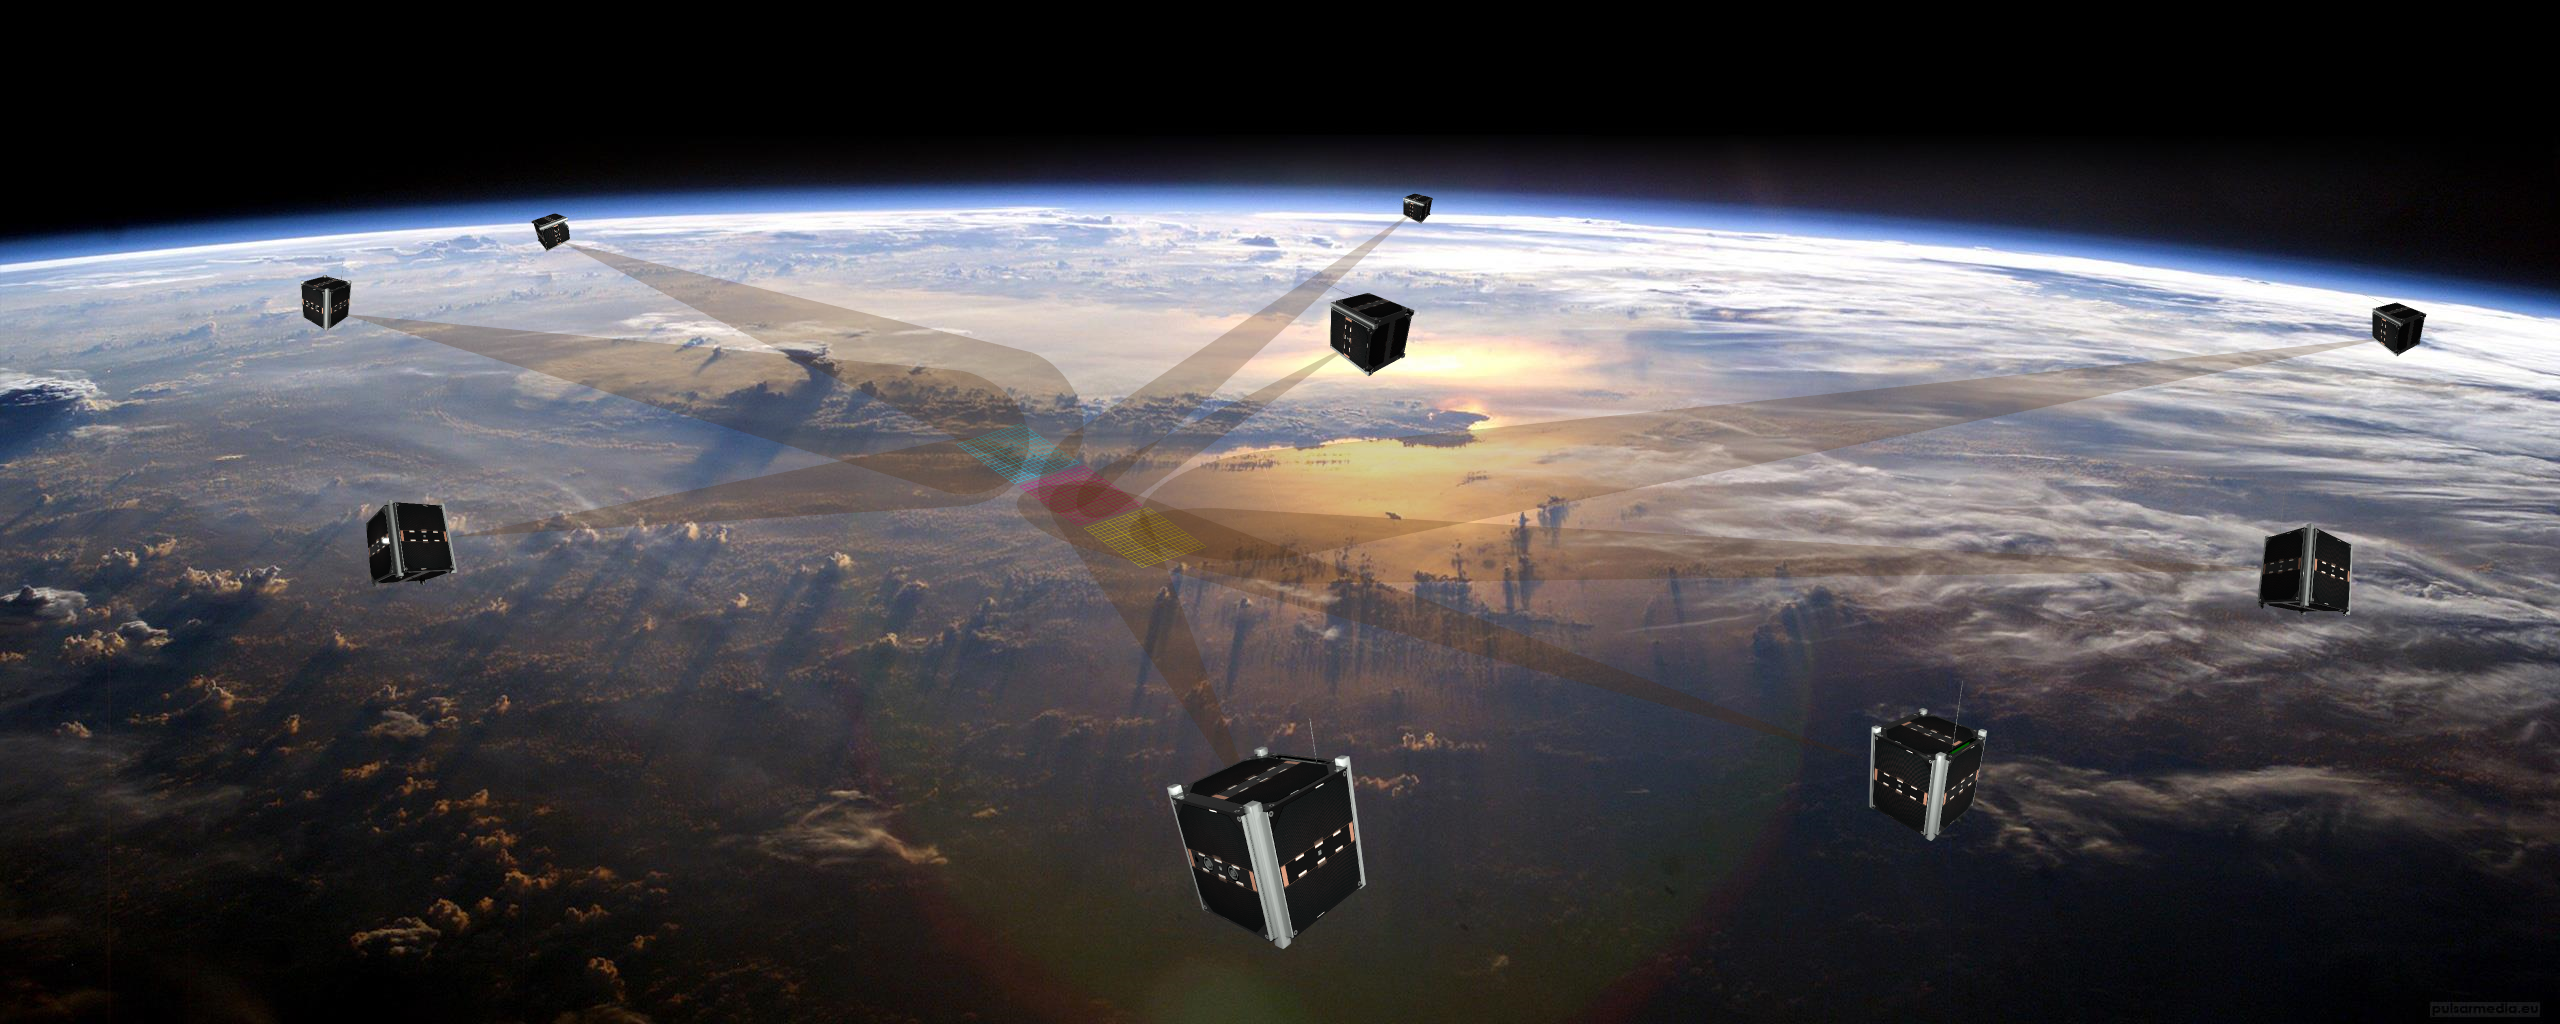 Earth observation by a formation of small satellites